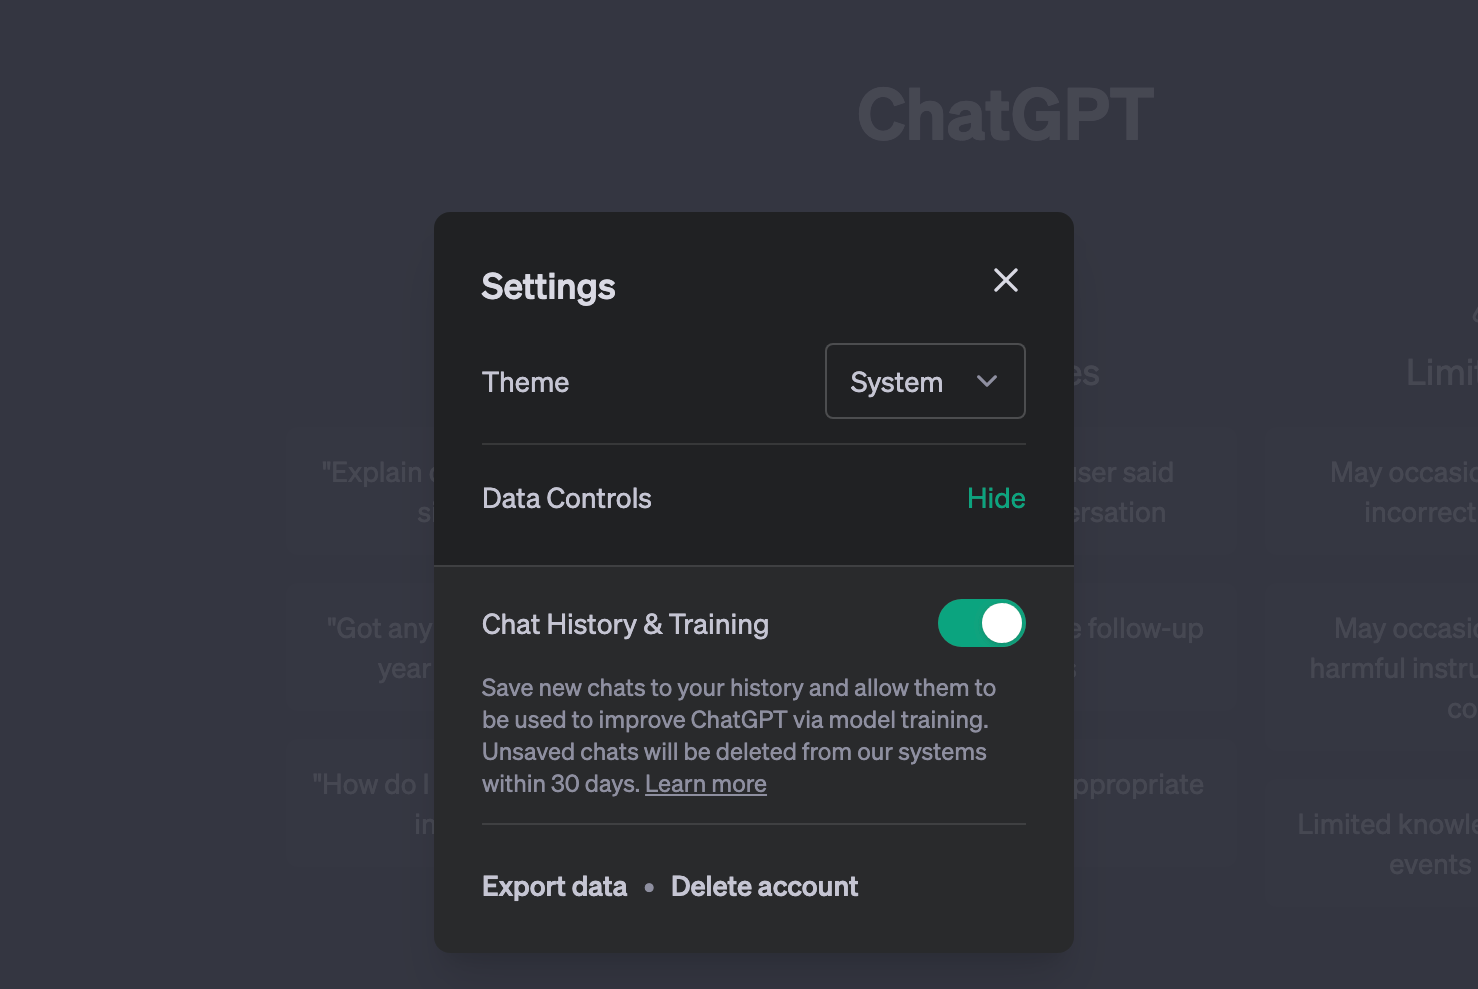 The option to disable chat history for ChatGPT